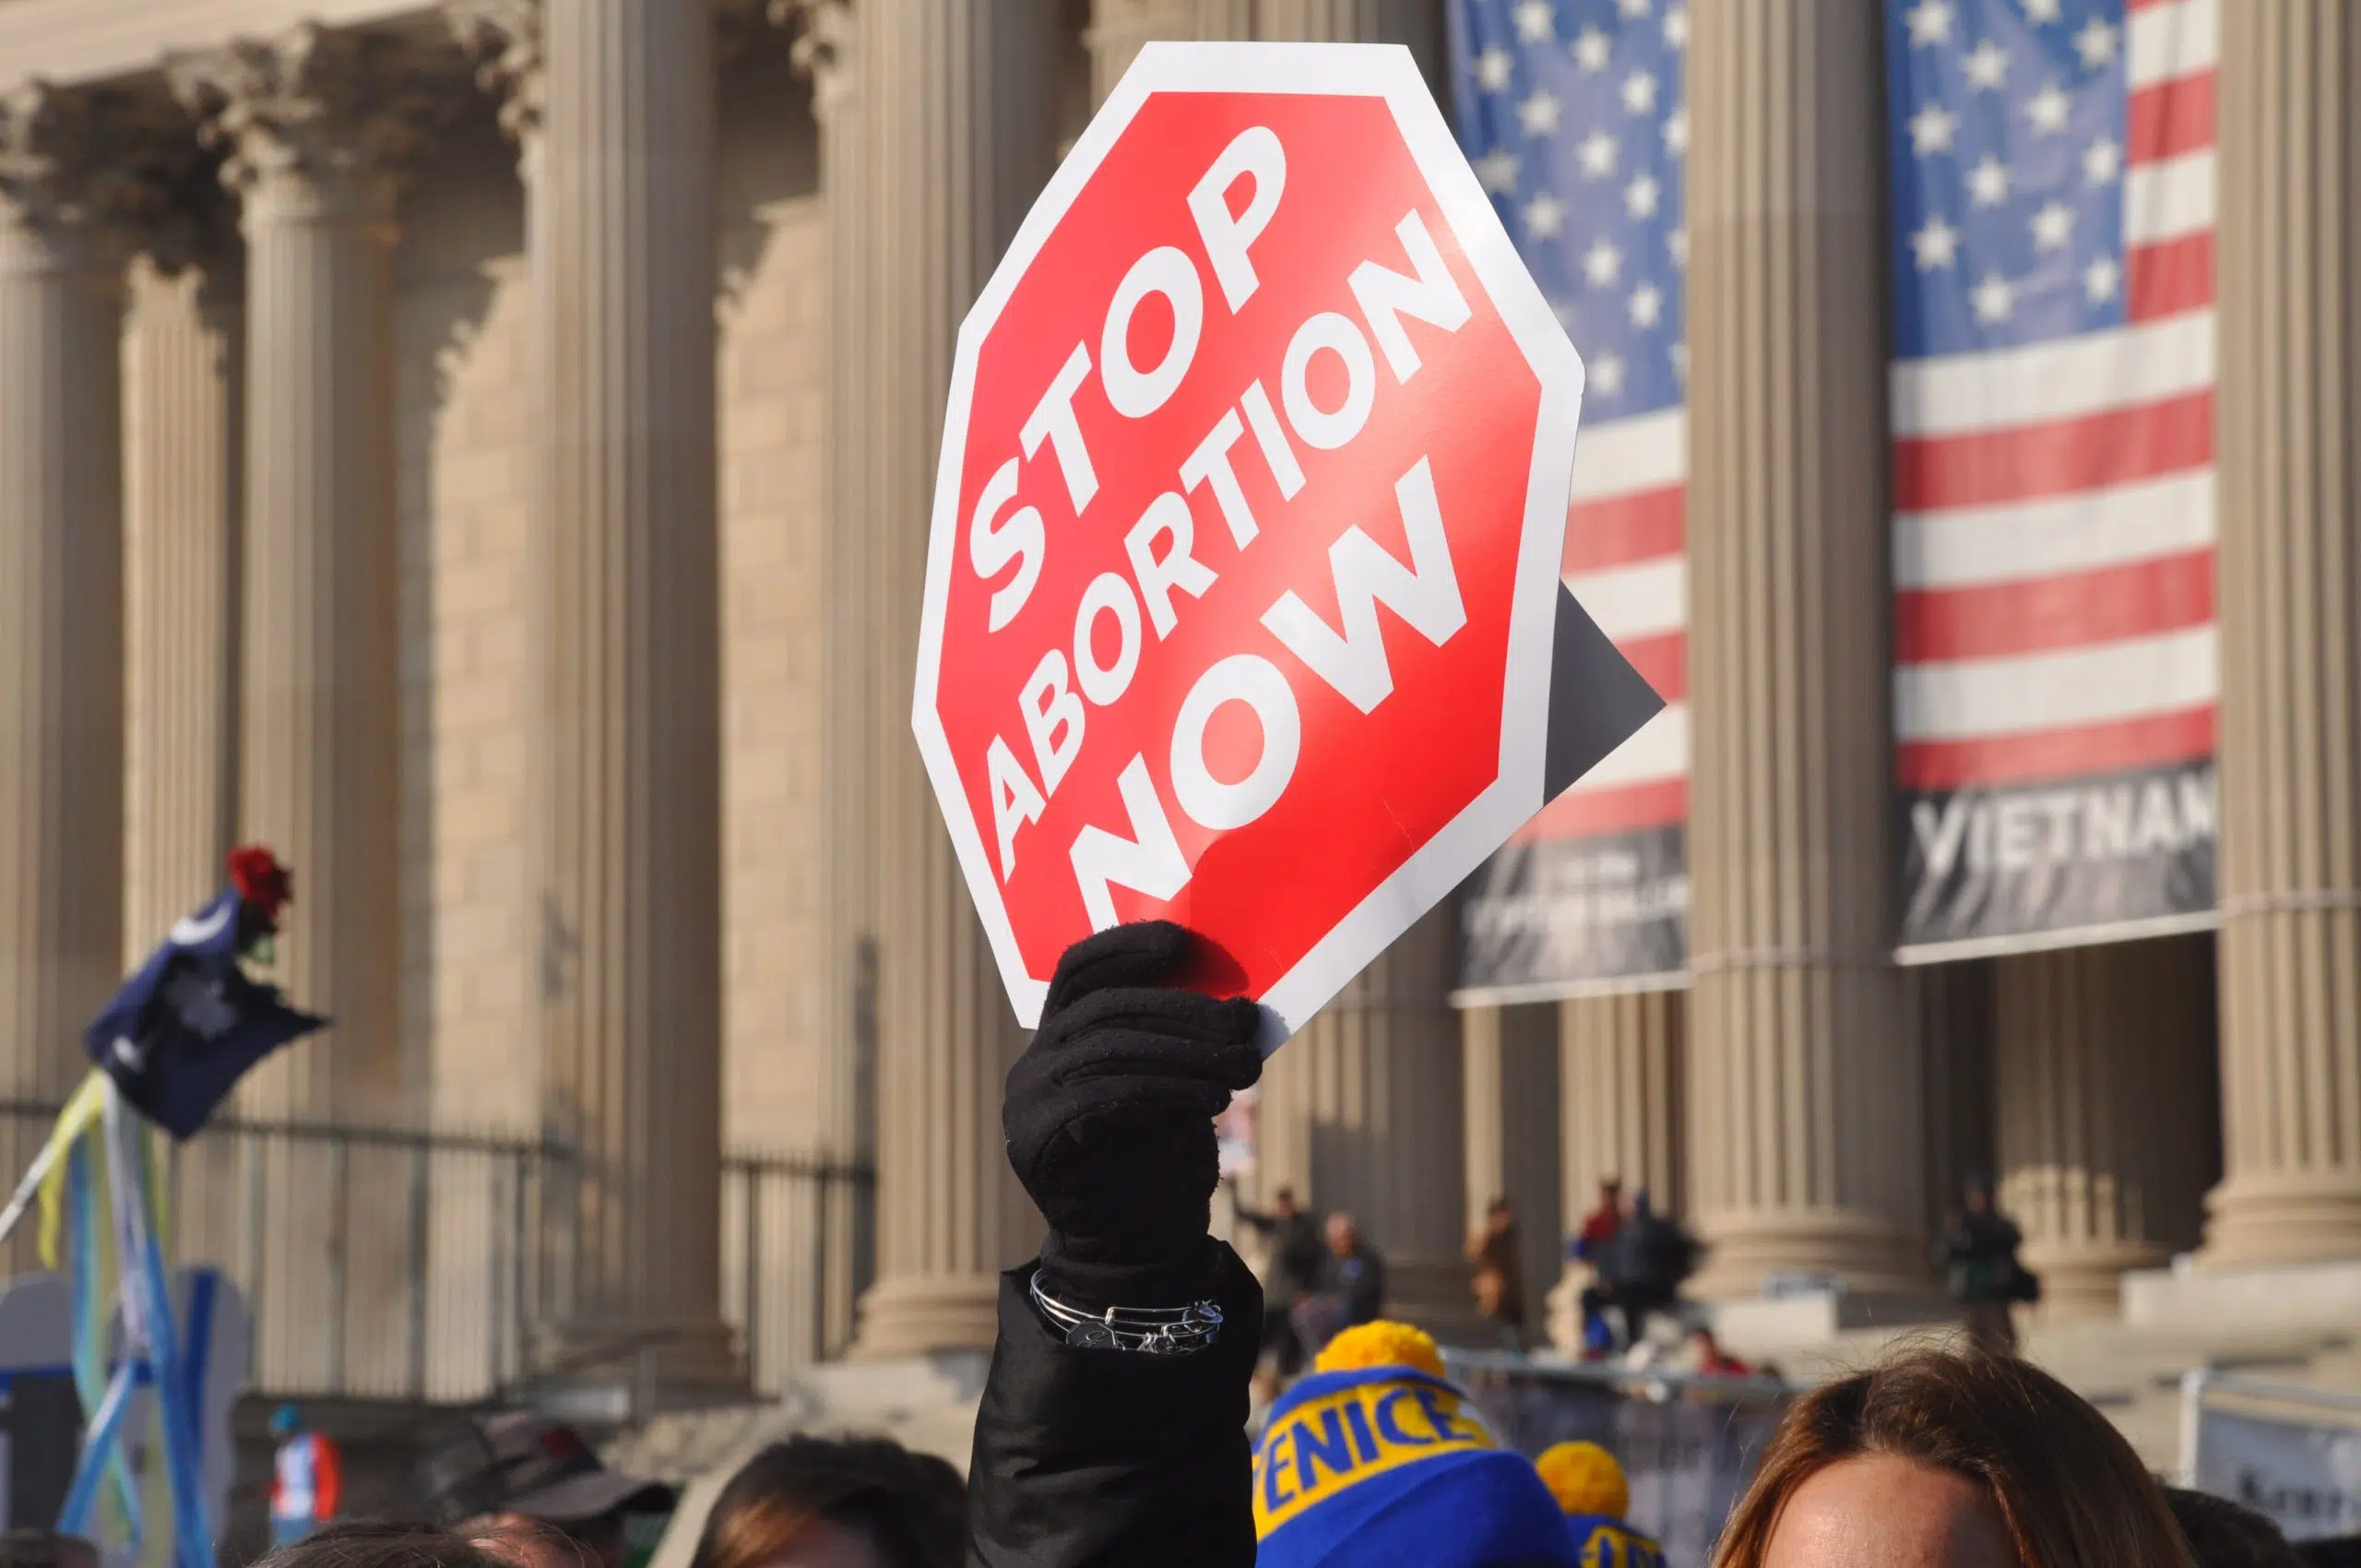 Abortion now illegal in Louisiana after U.S. Supreme Court strikes down Roe v. Wade